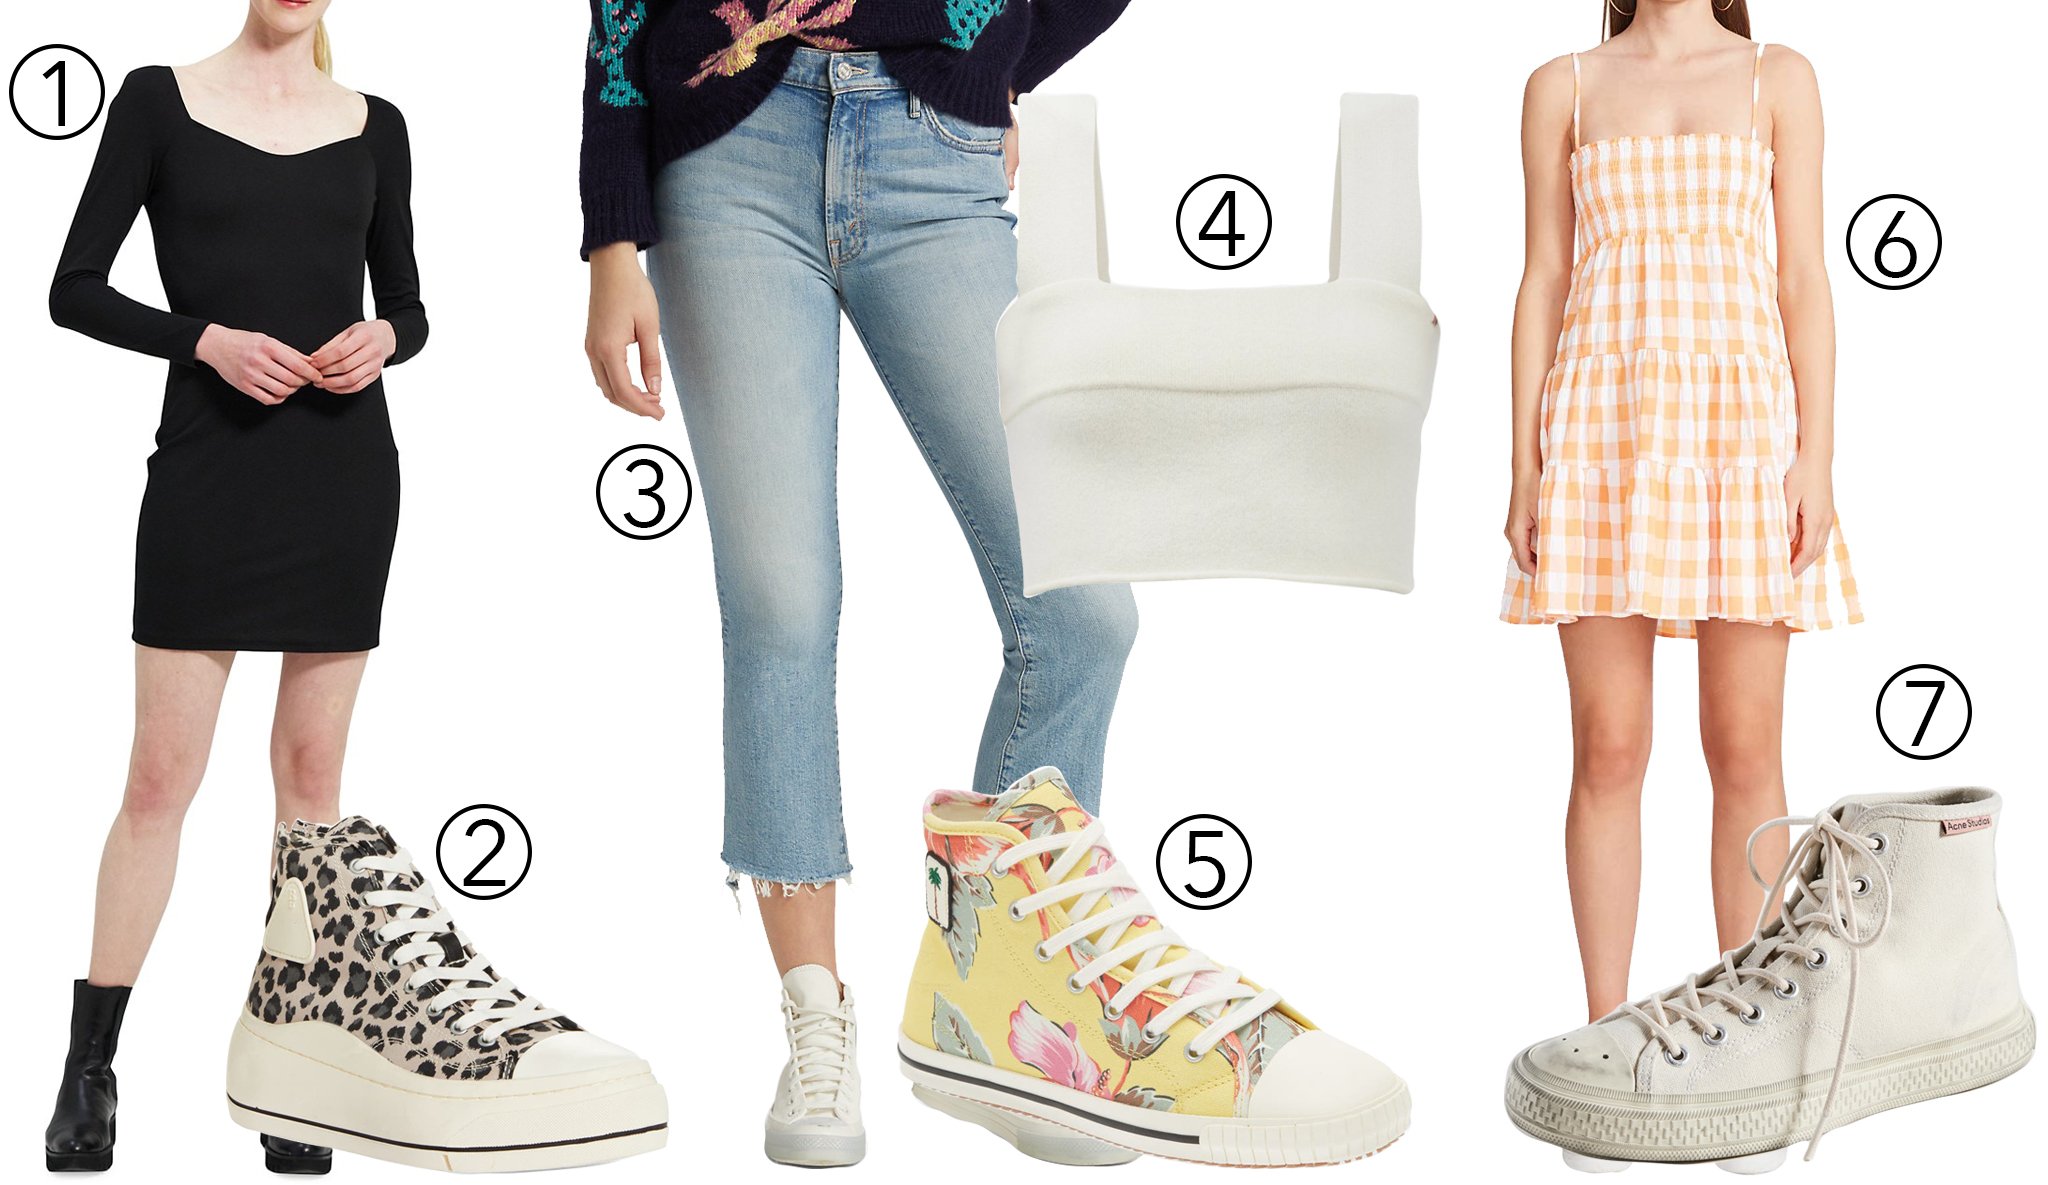 What can I wear with my high tops? 4FashionAdvice